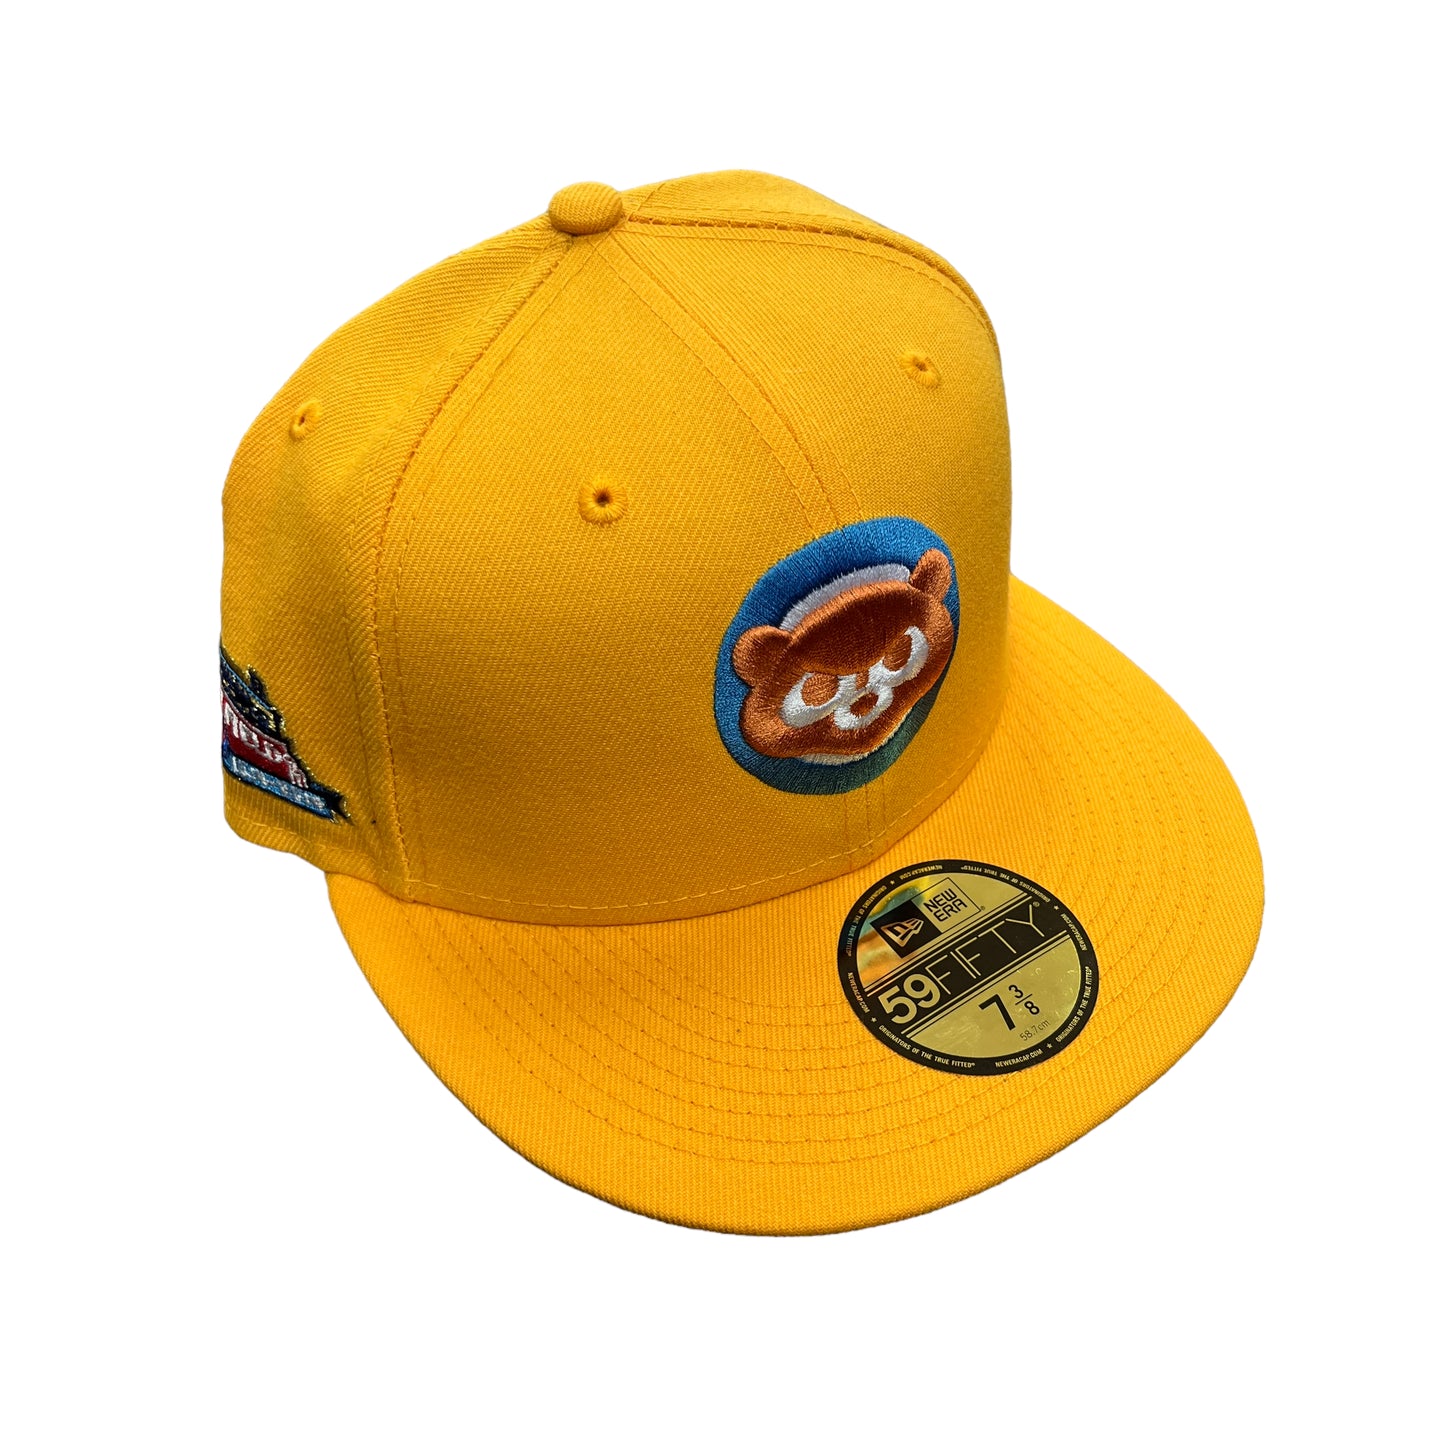 Cubs Yellow/Blue Hat